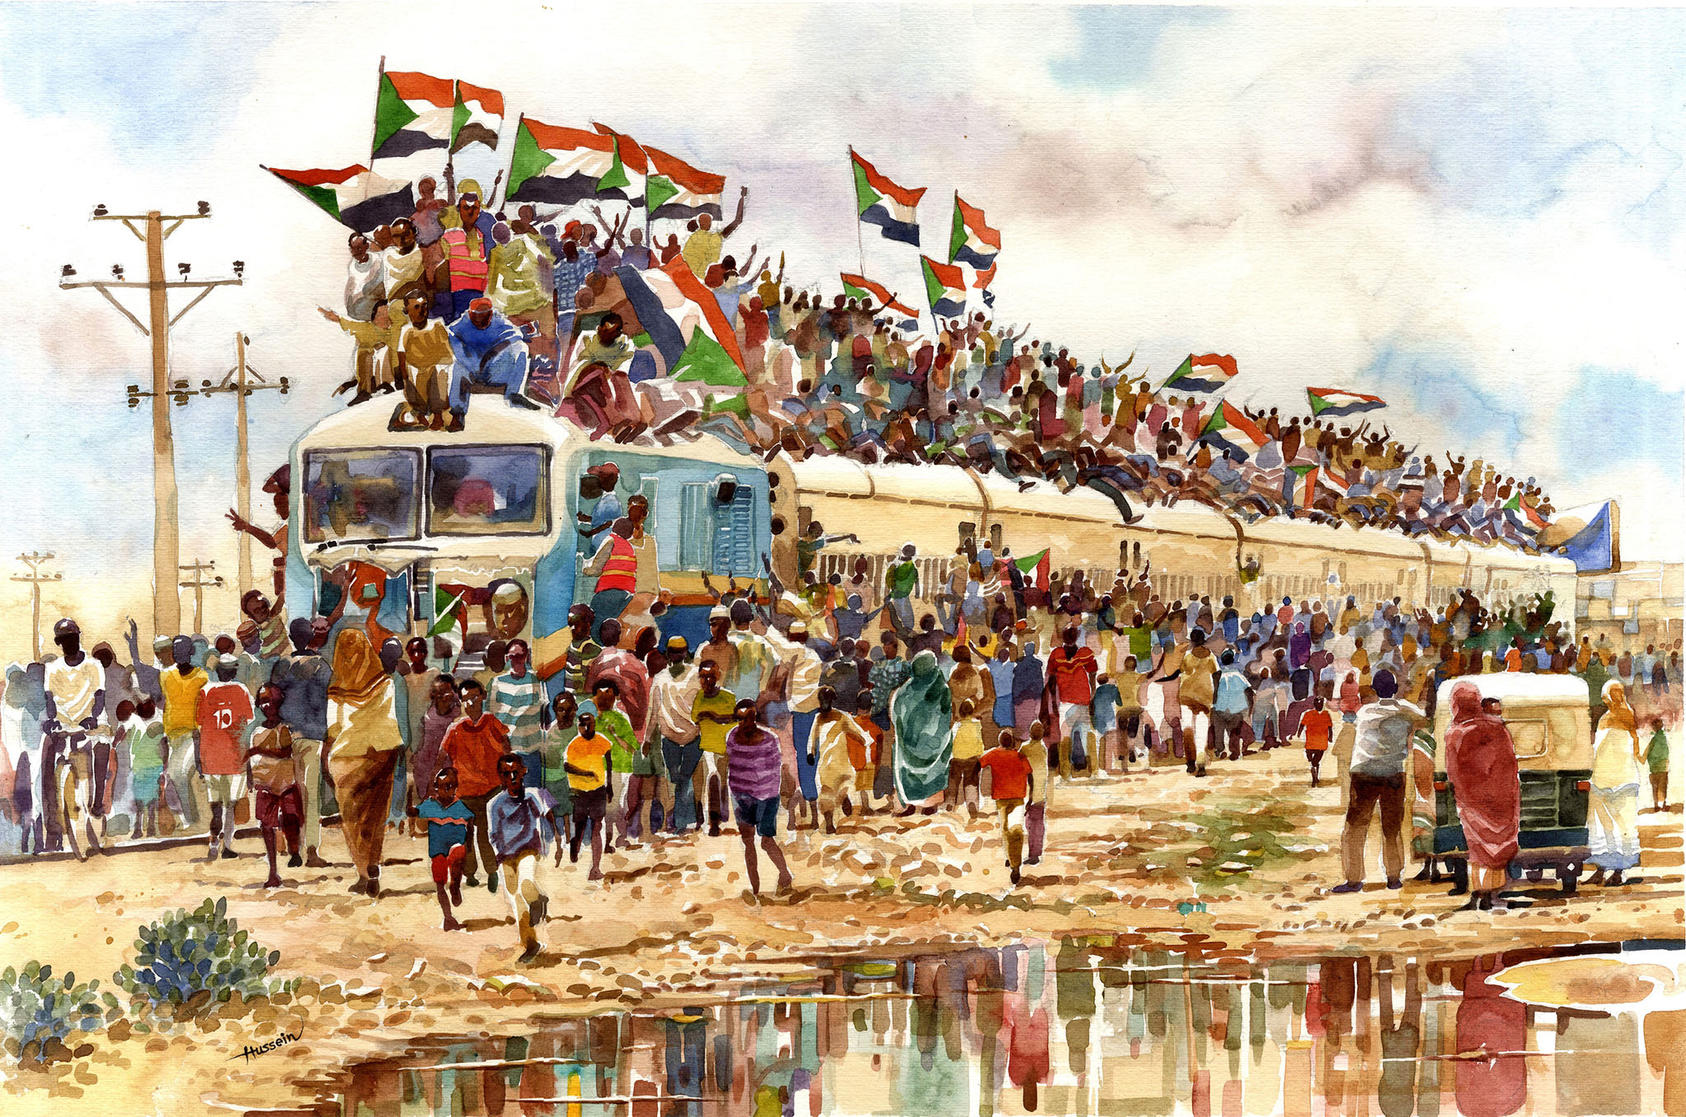  Hussein Merghani’s watercolor of hundreds of people from Atbara traveling to join the sit-in at the military headquarters in Khartoum in April 2019.